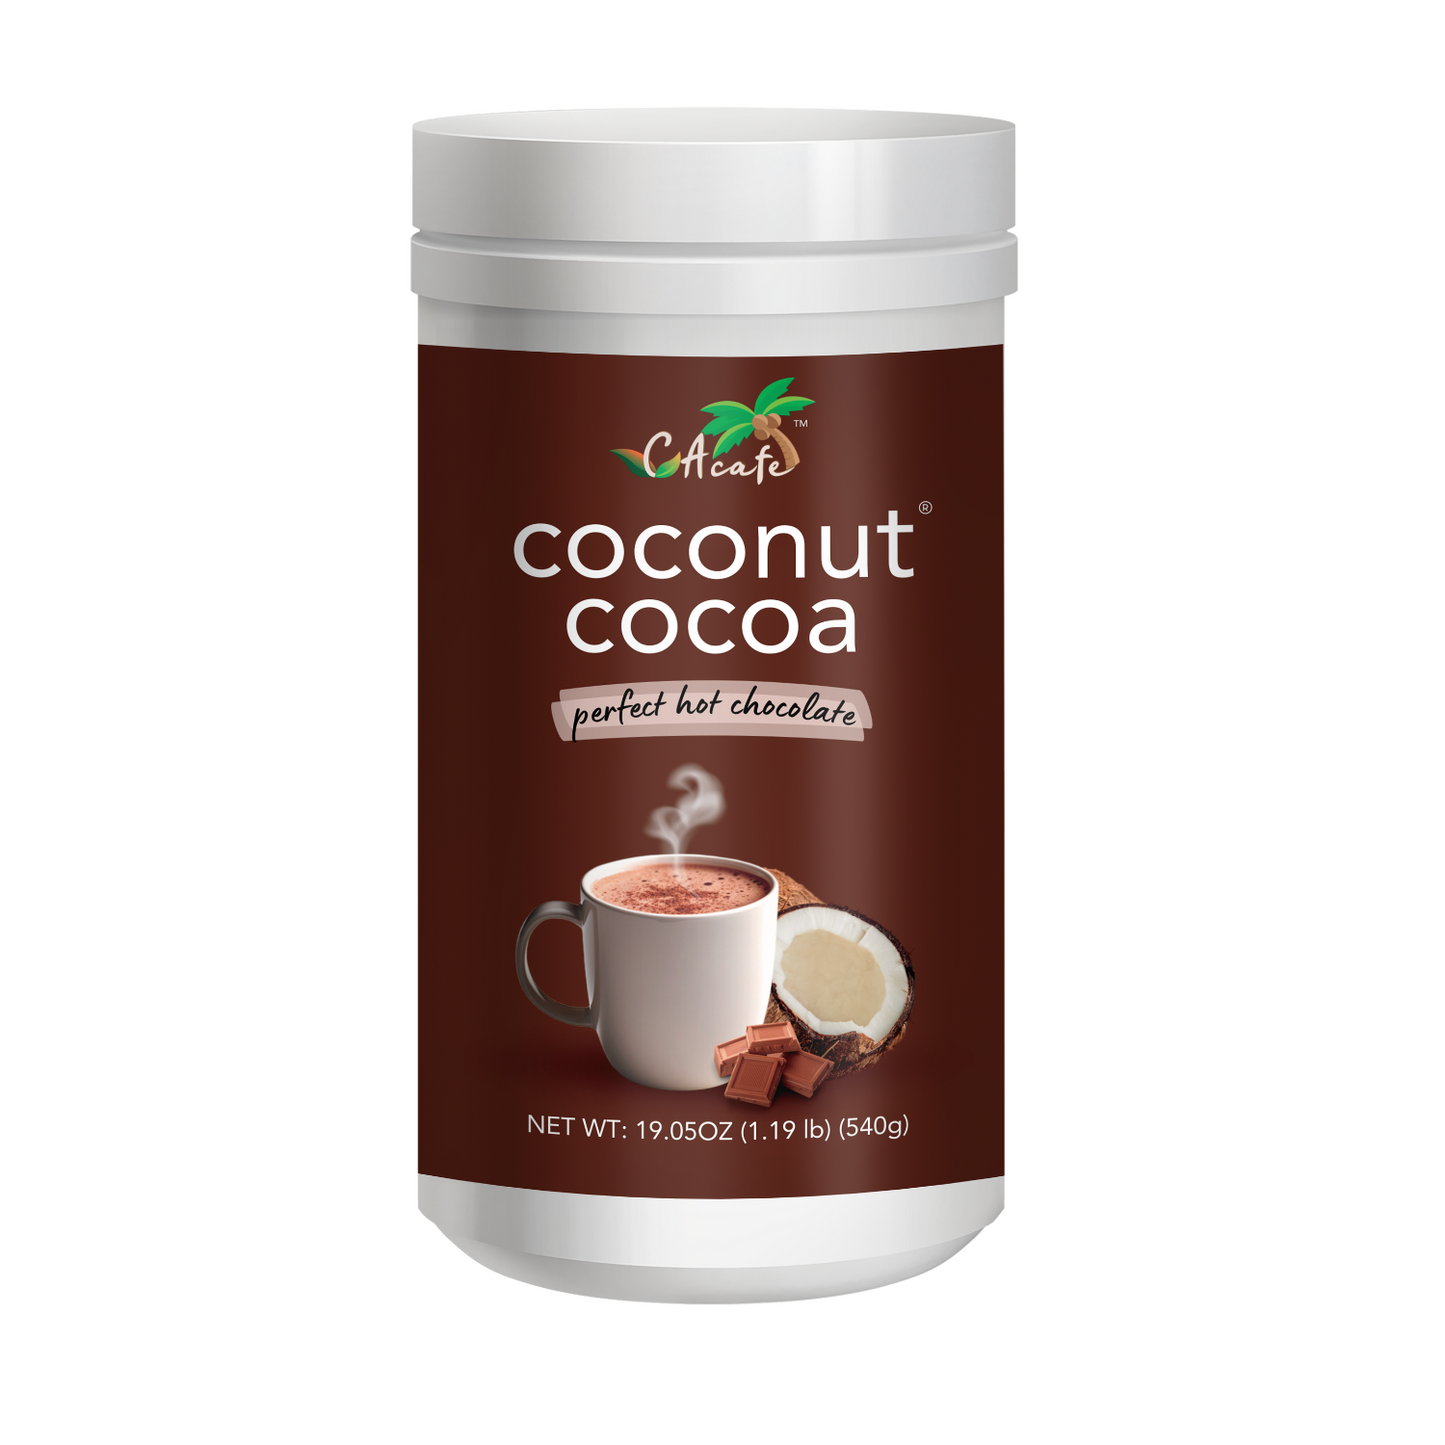 2 pack of Coconut Cocoa (New Look) _ 19.05oz each